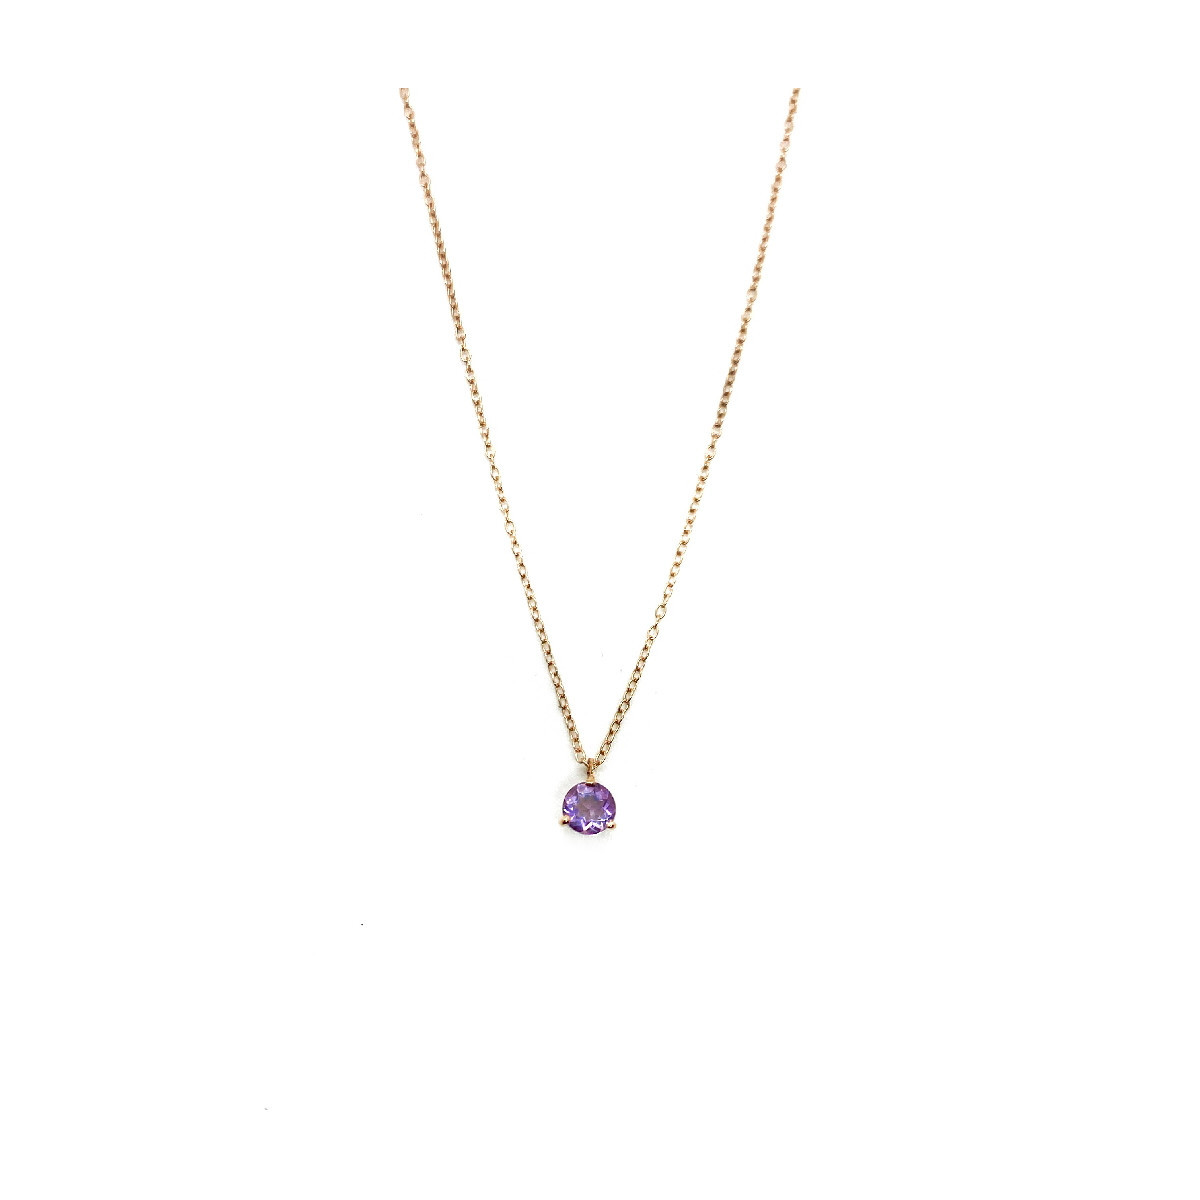 SUPERORO AMETHYST GOLD NECKLACE - A41-MOD1243A-43:03